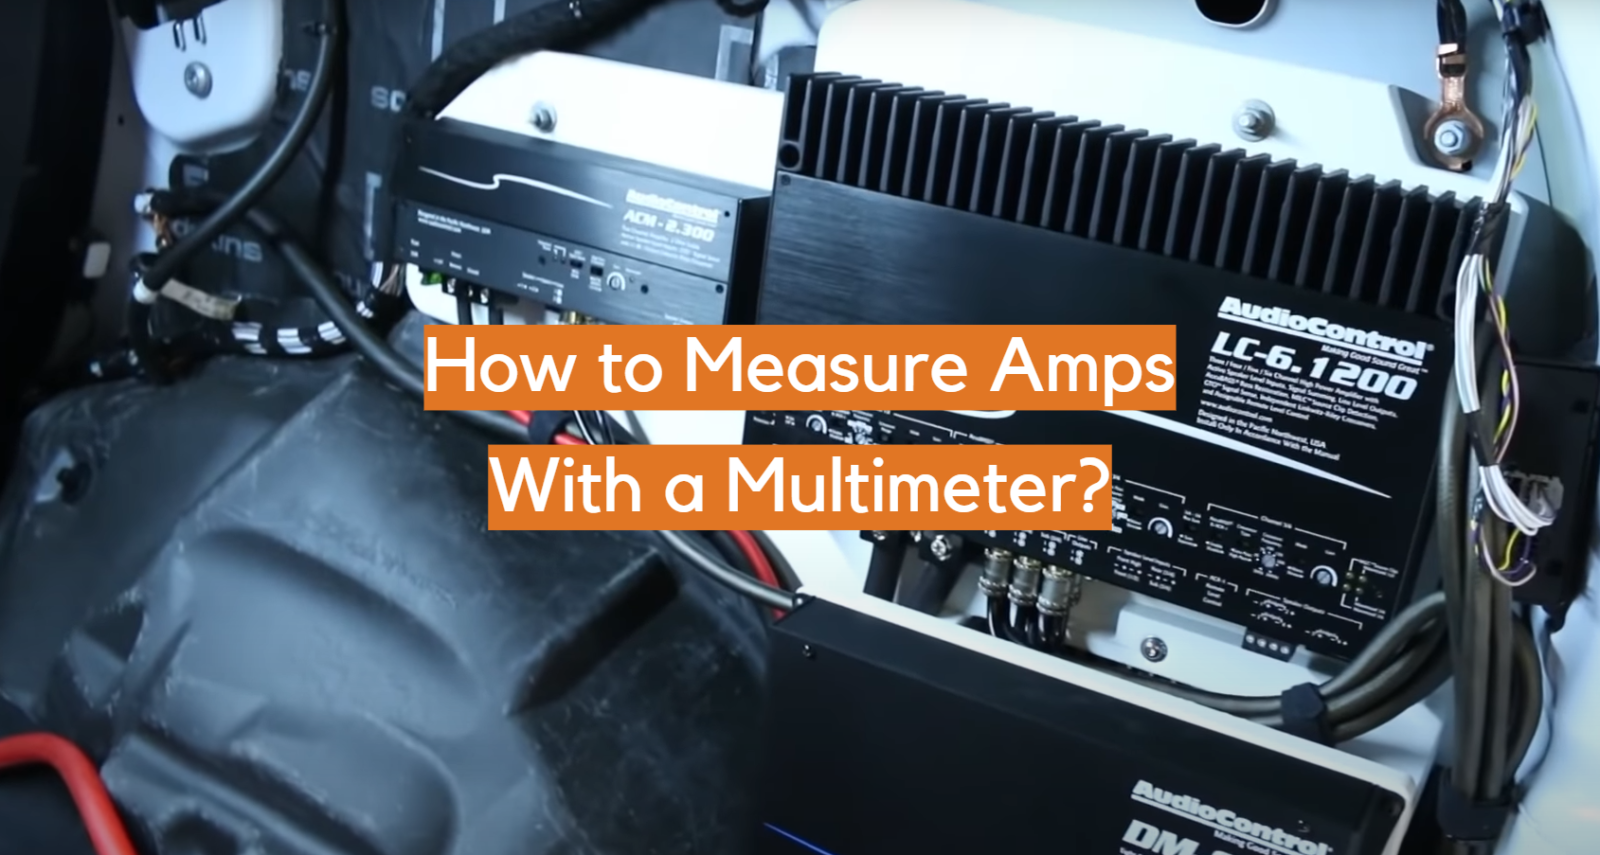 How to Measure Amps With a Multimeter?